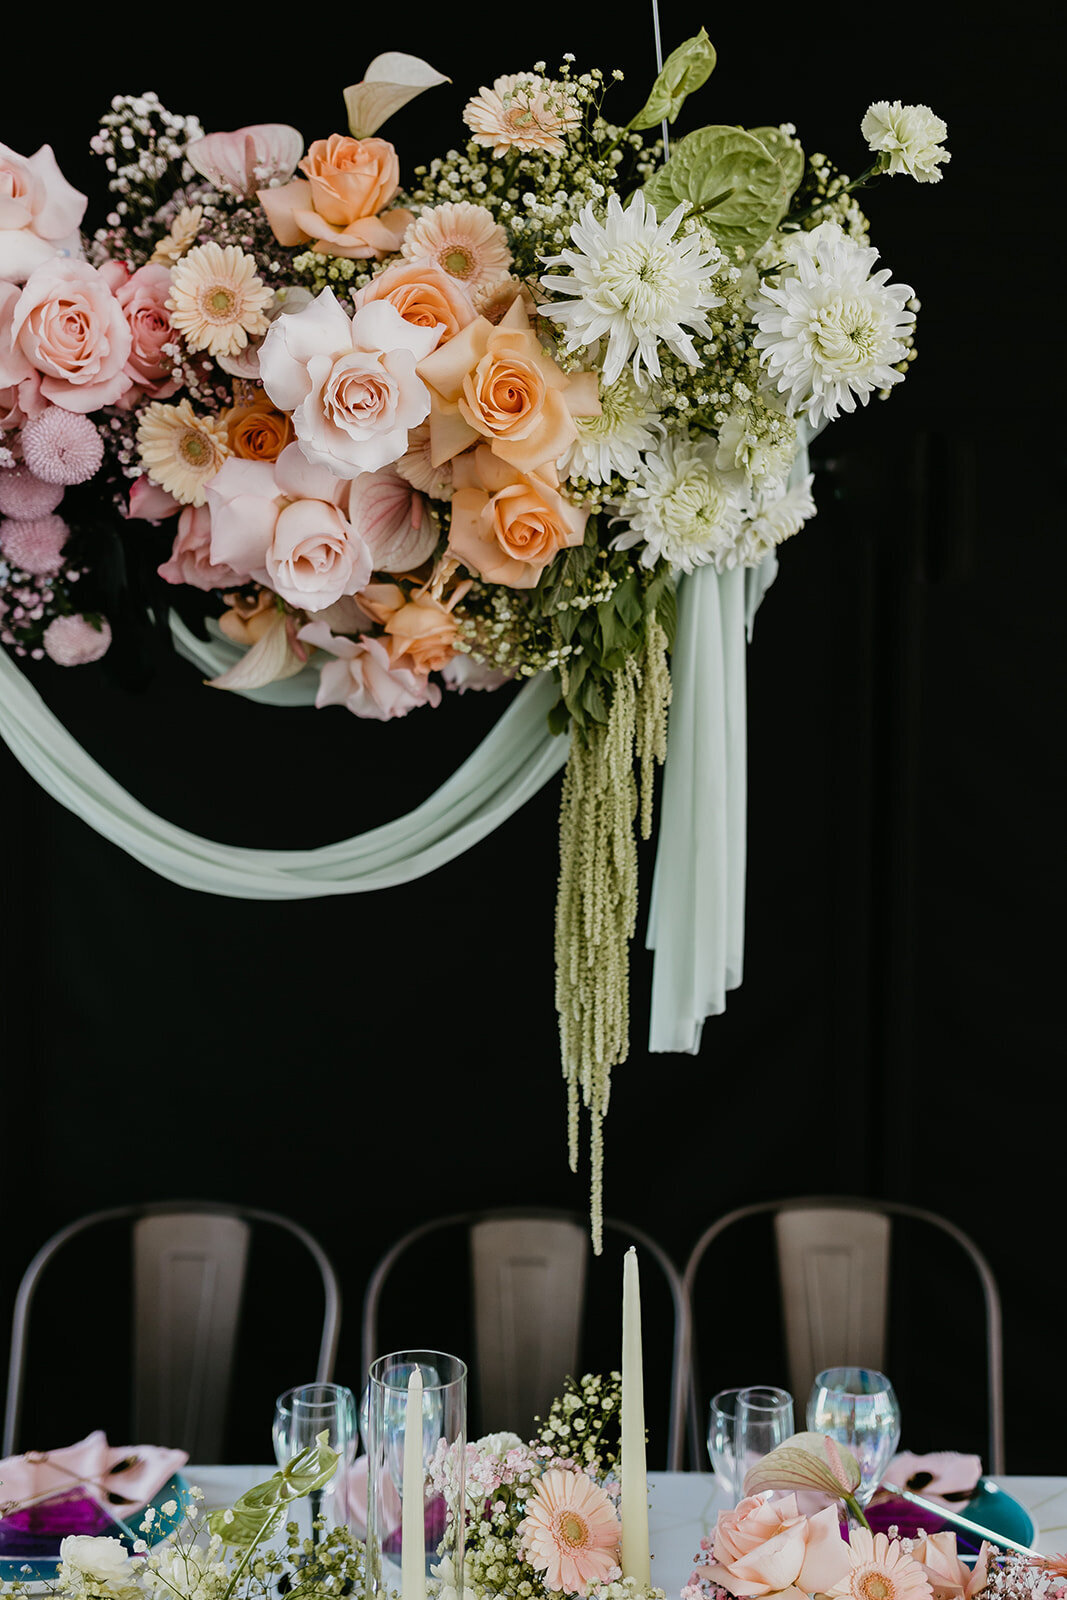 Colourful and trendy florals of pink, orange, and white hanging at 52 North Venue, an industrial and unique wedding venue in Sylvan Lake, AB, featured on the Brontë Bride Vendor Guide.52 North Venue, an industrial and unique wedding venue in Sylvan Lake, AB, featured on the Brontë Bride Vendor Guide.